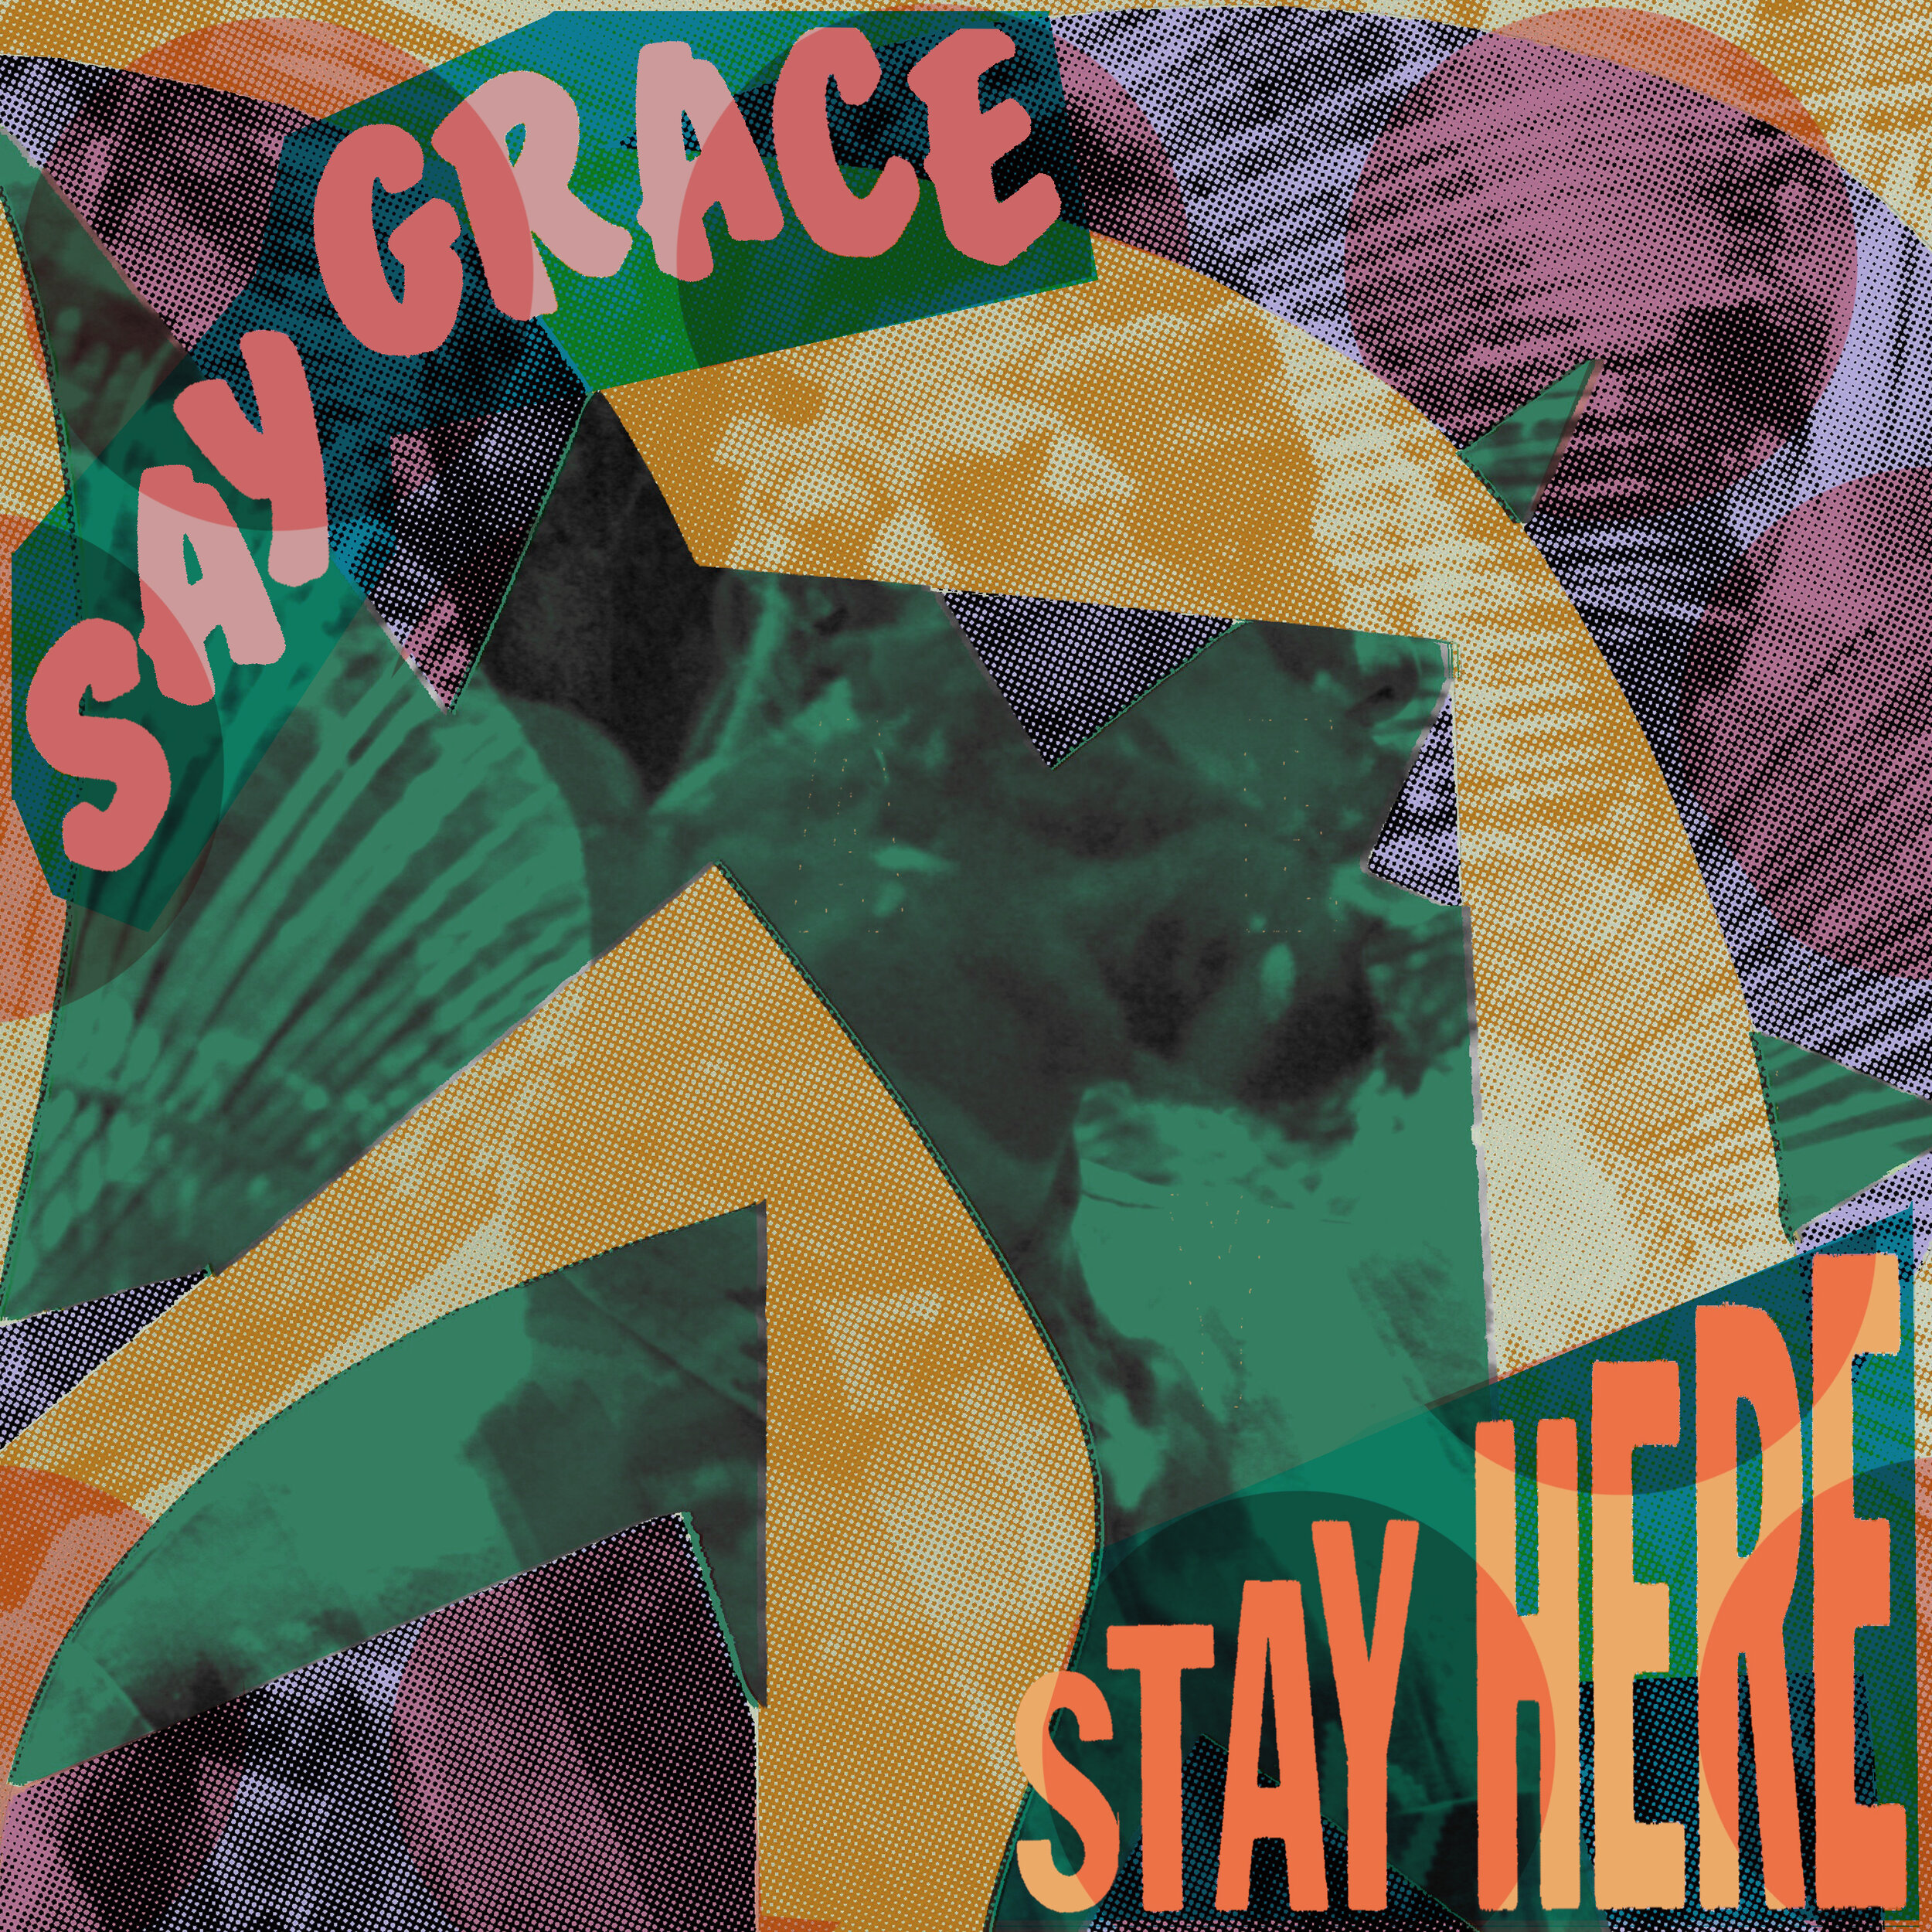 Say Grace/Stay Here